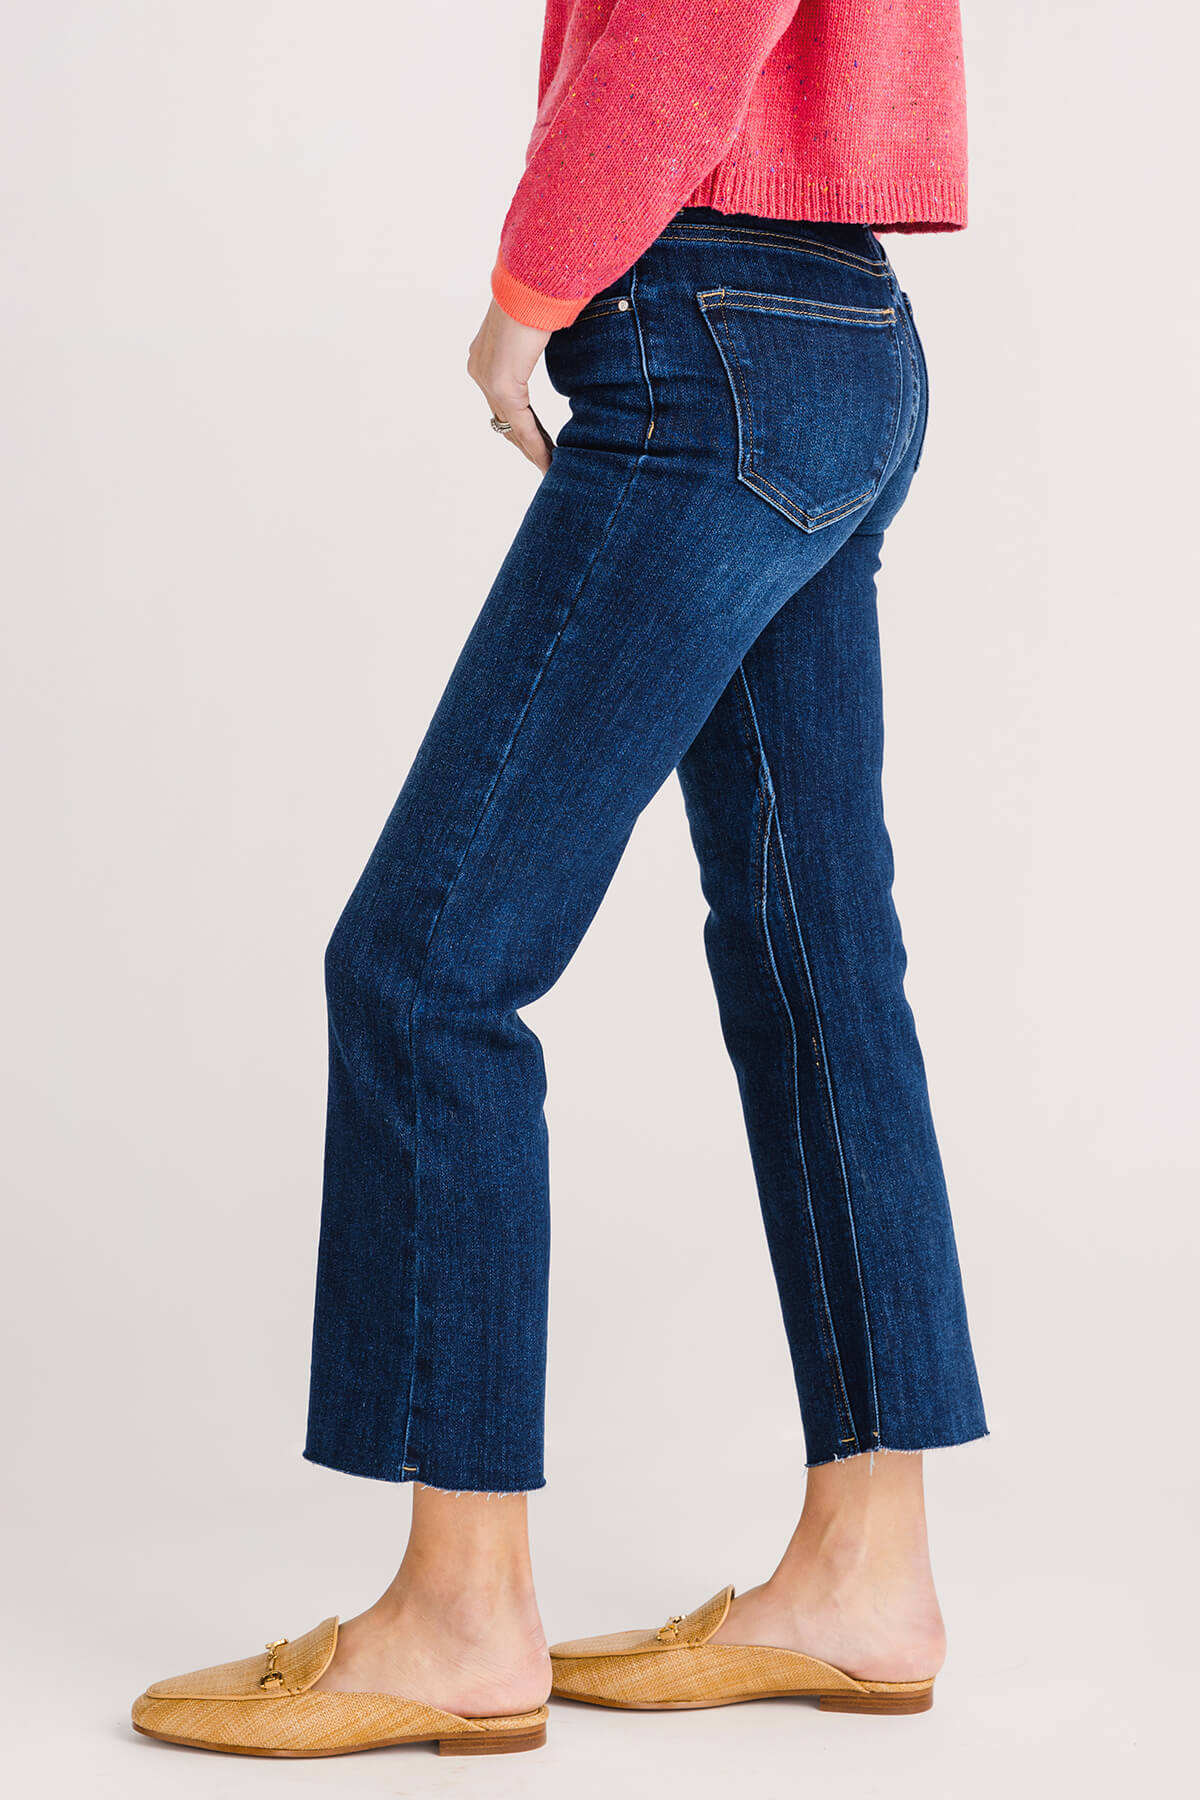 Risen Aspen Twisted Seam Ankle Flare Jeans